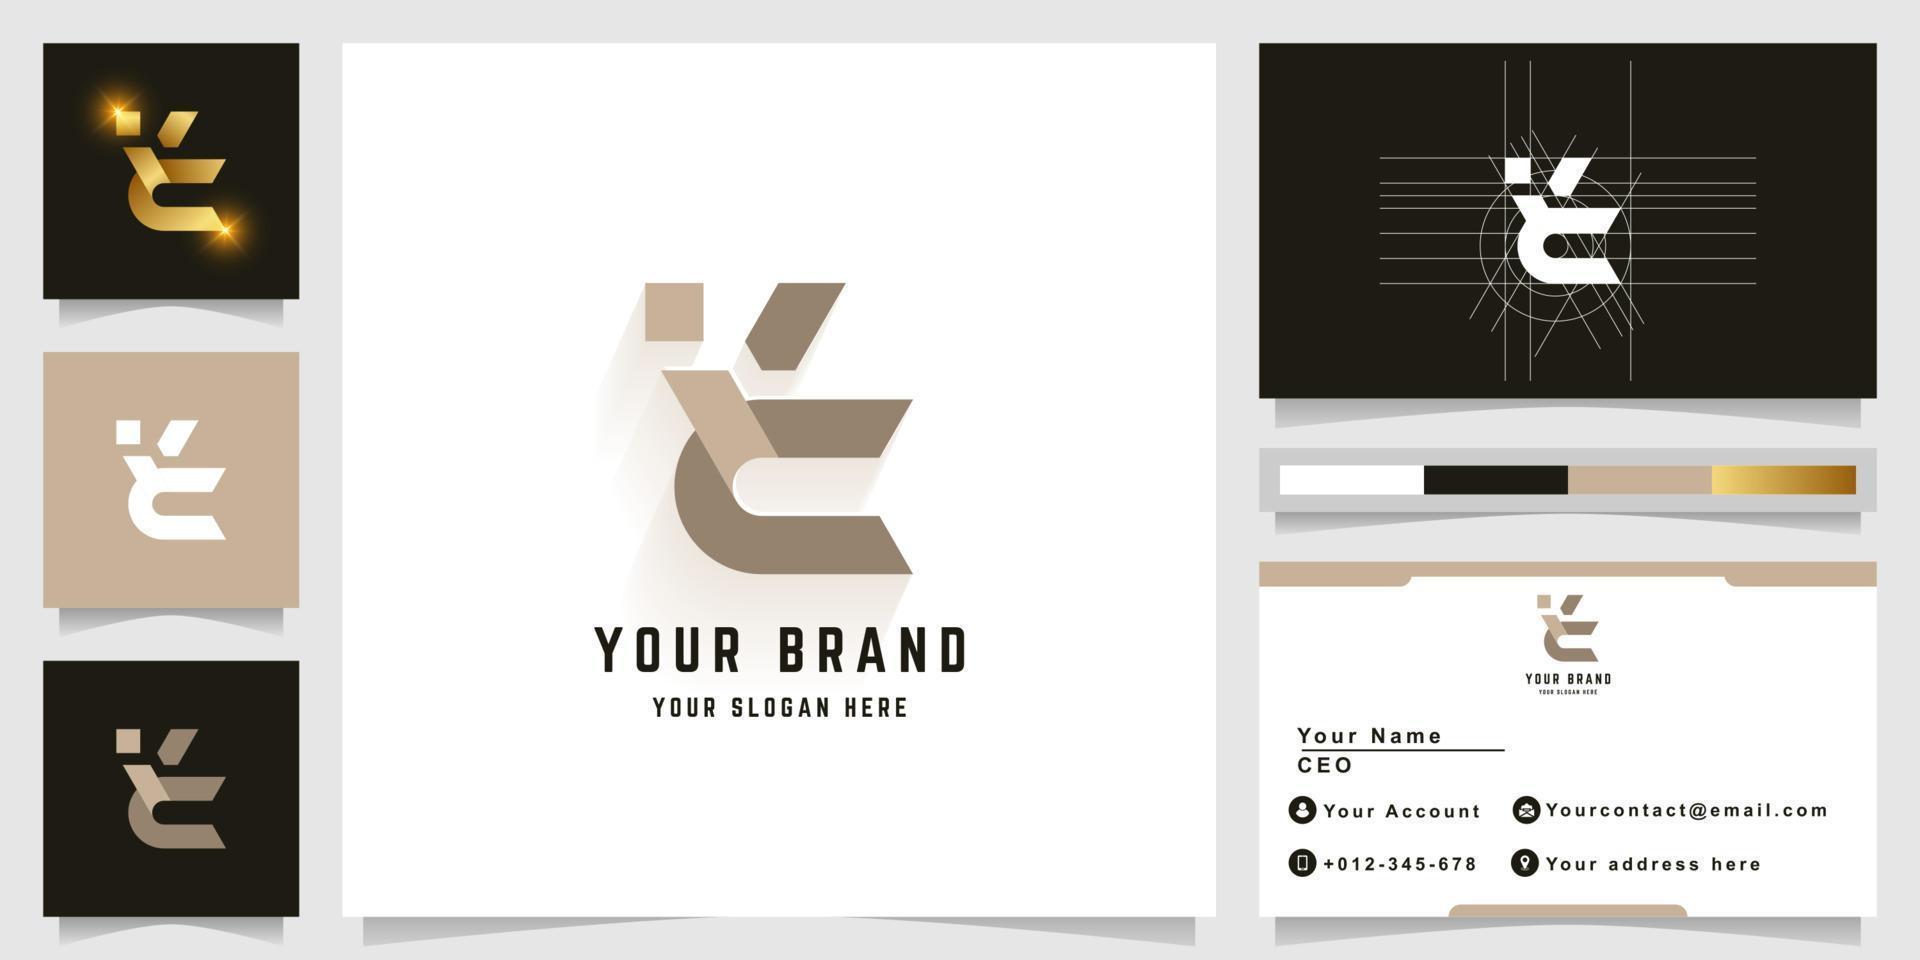 Letter it or yc monogram logo with business card design vector